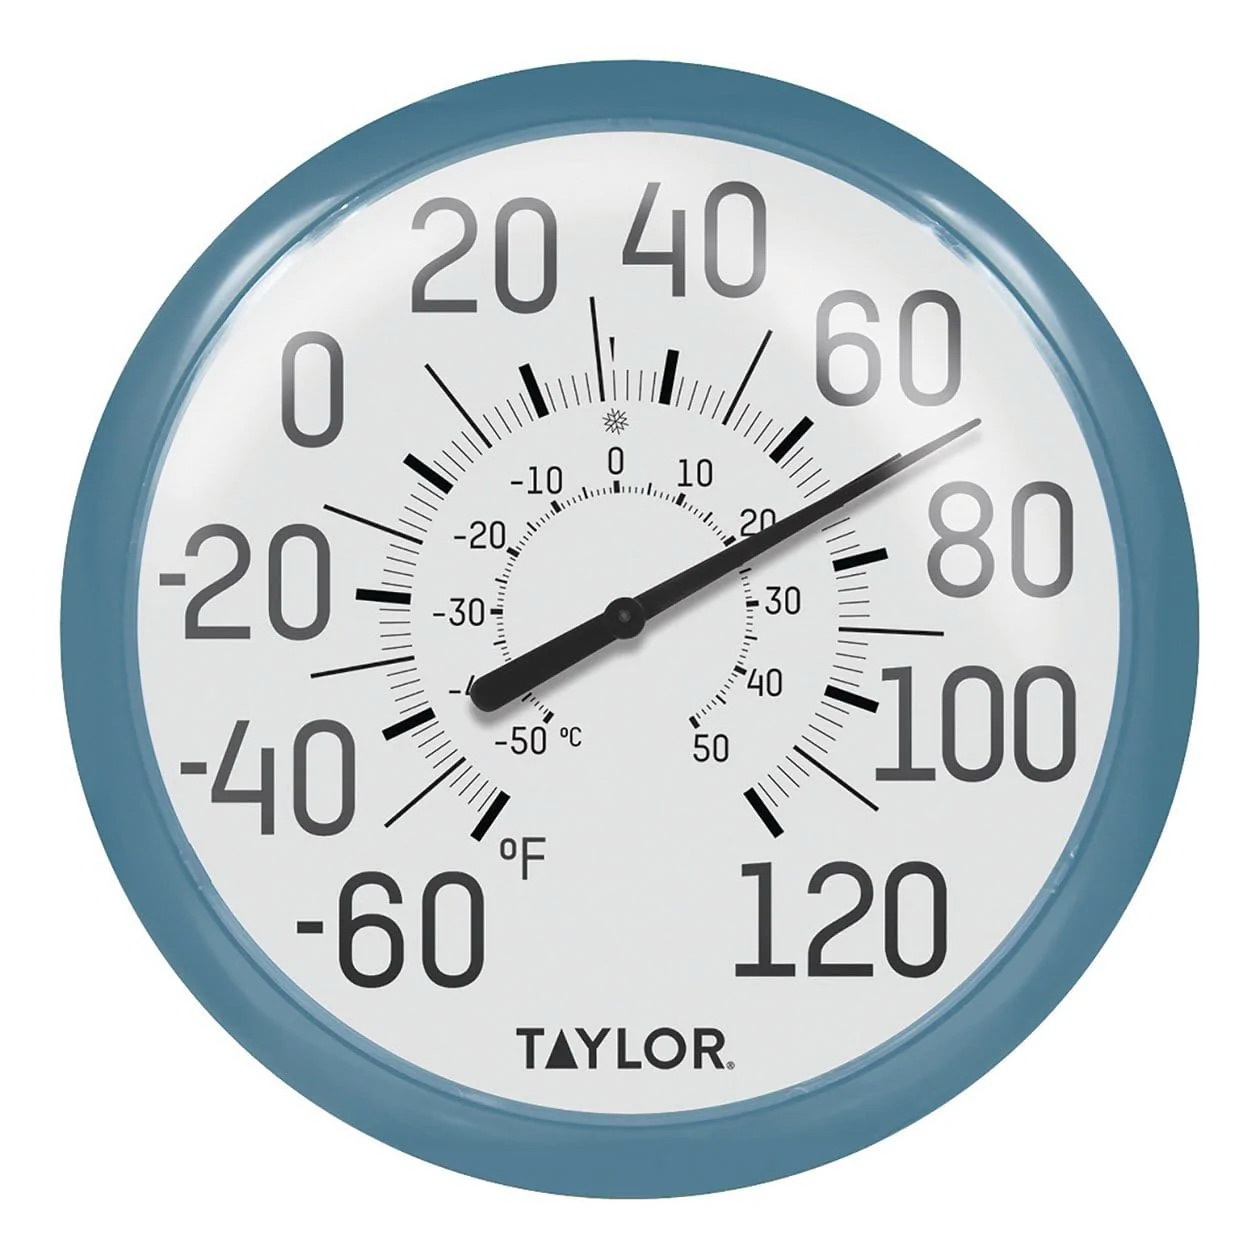 6700TE Big and Bold Thermometer, -60 to 120 deg F, Teal Bezel